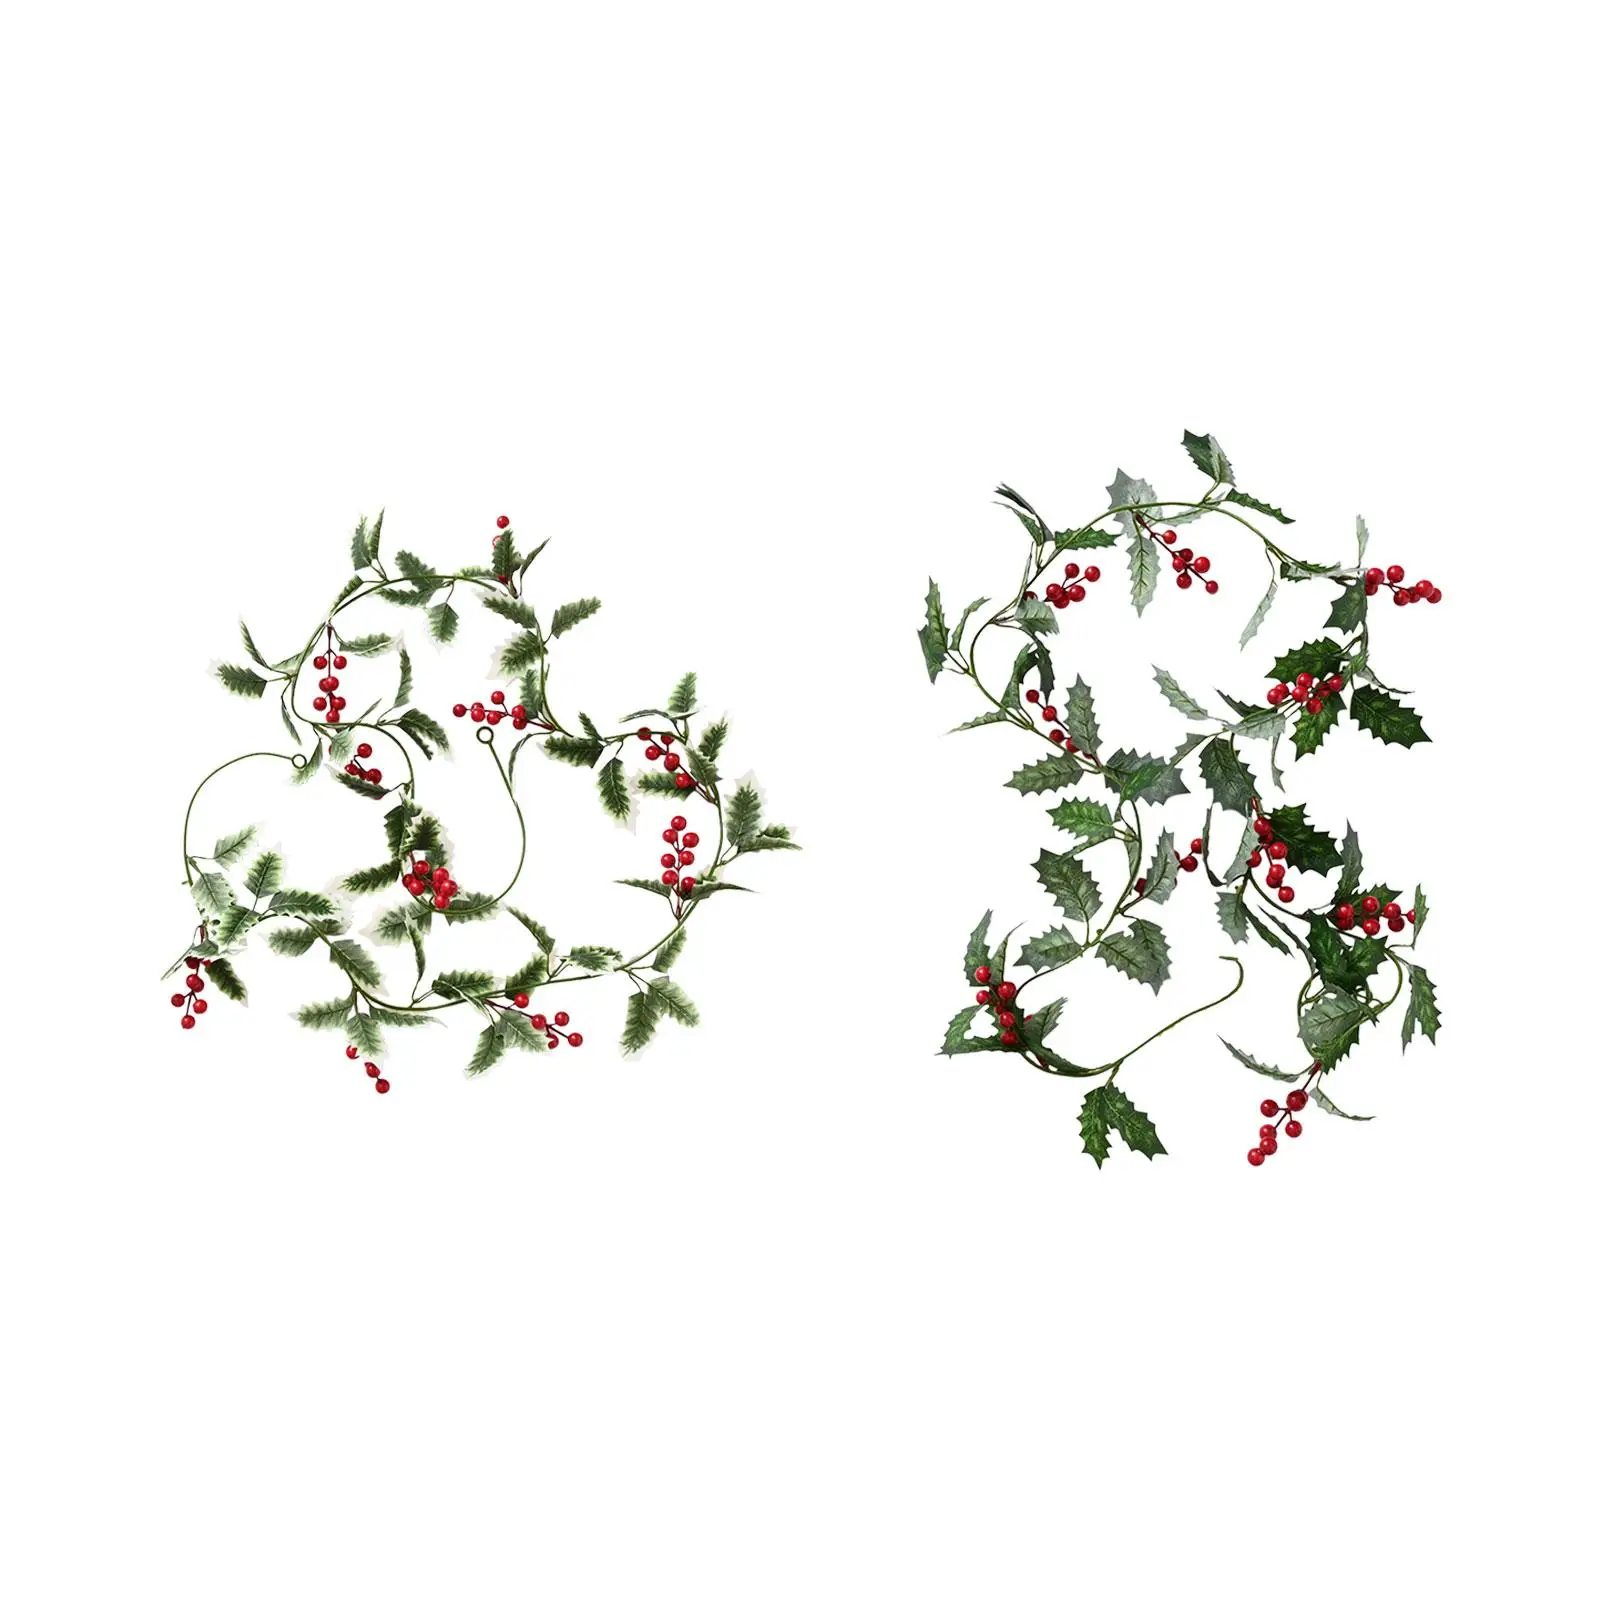 Artificial Christmas Vine Garland 200cm Ornament for Holiday New Year Xmas